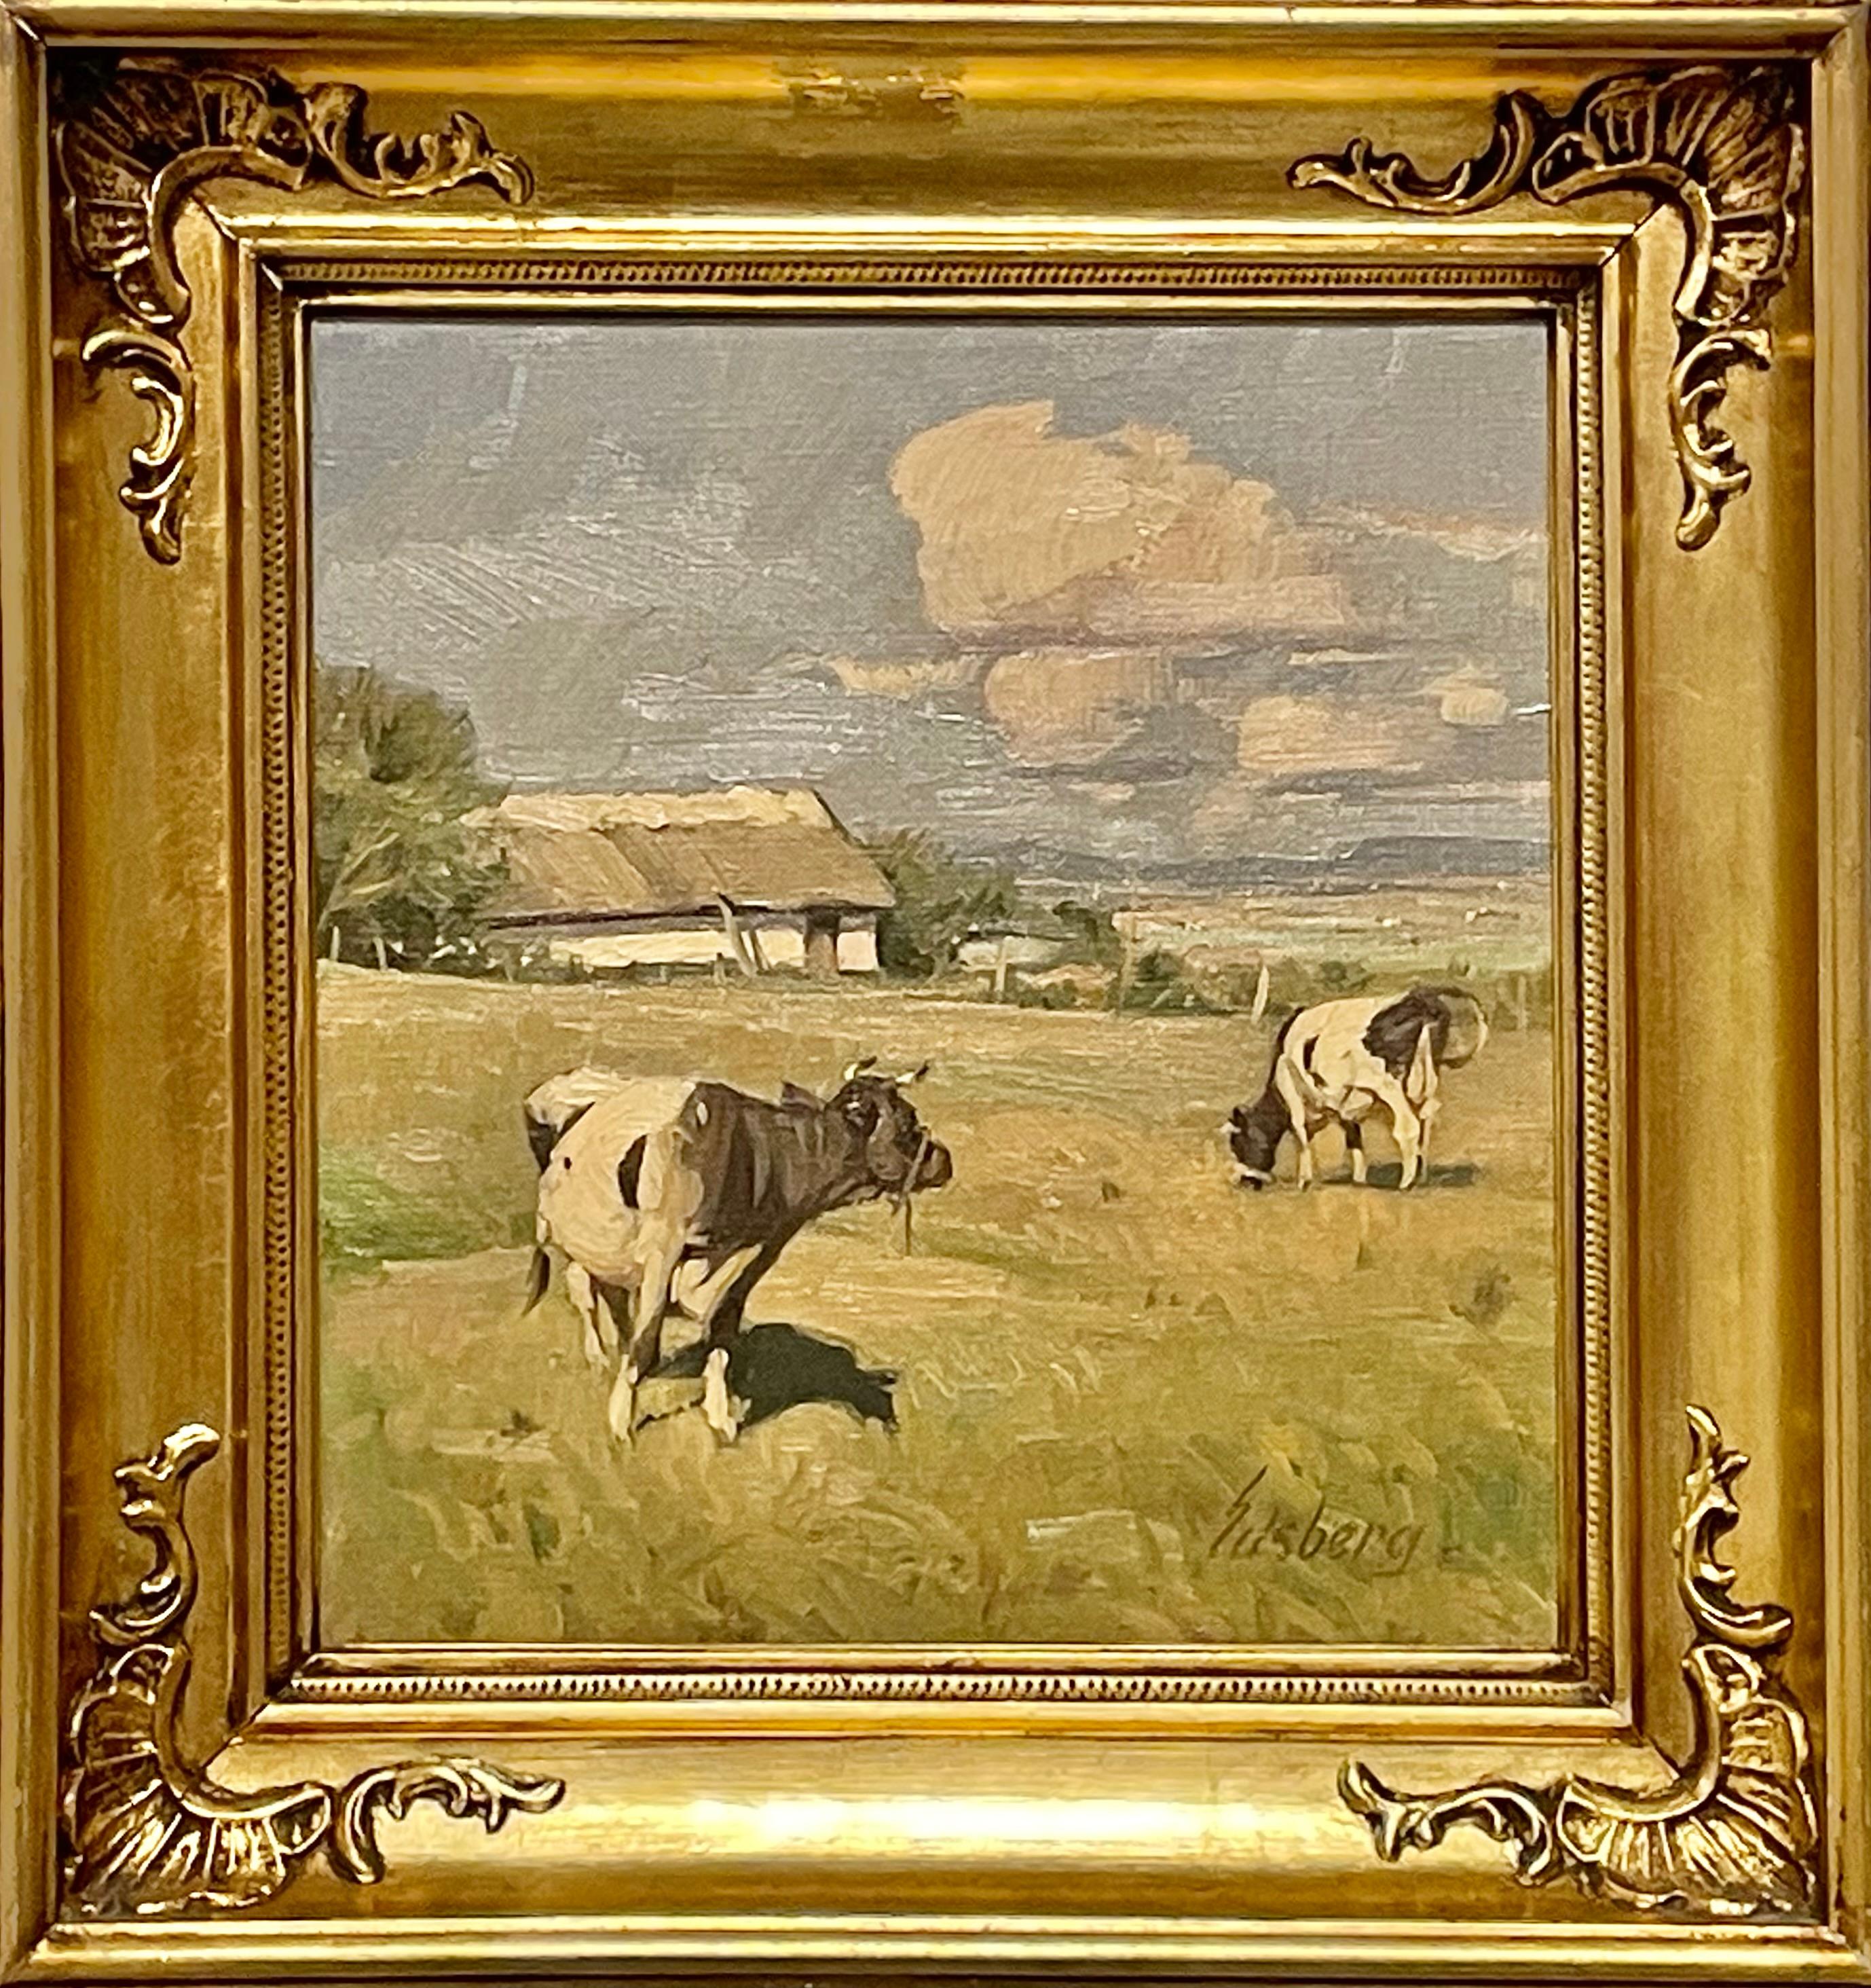 This is an oil on canvas landscape painting by Knud Edsberg (1911-2003) from Denmark estimated to be from the 1950s.
The motive is cows in a field.

The painting is signed in the bottom right corner and framed in a gold painted wooden frame.

Good